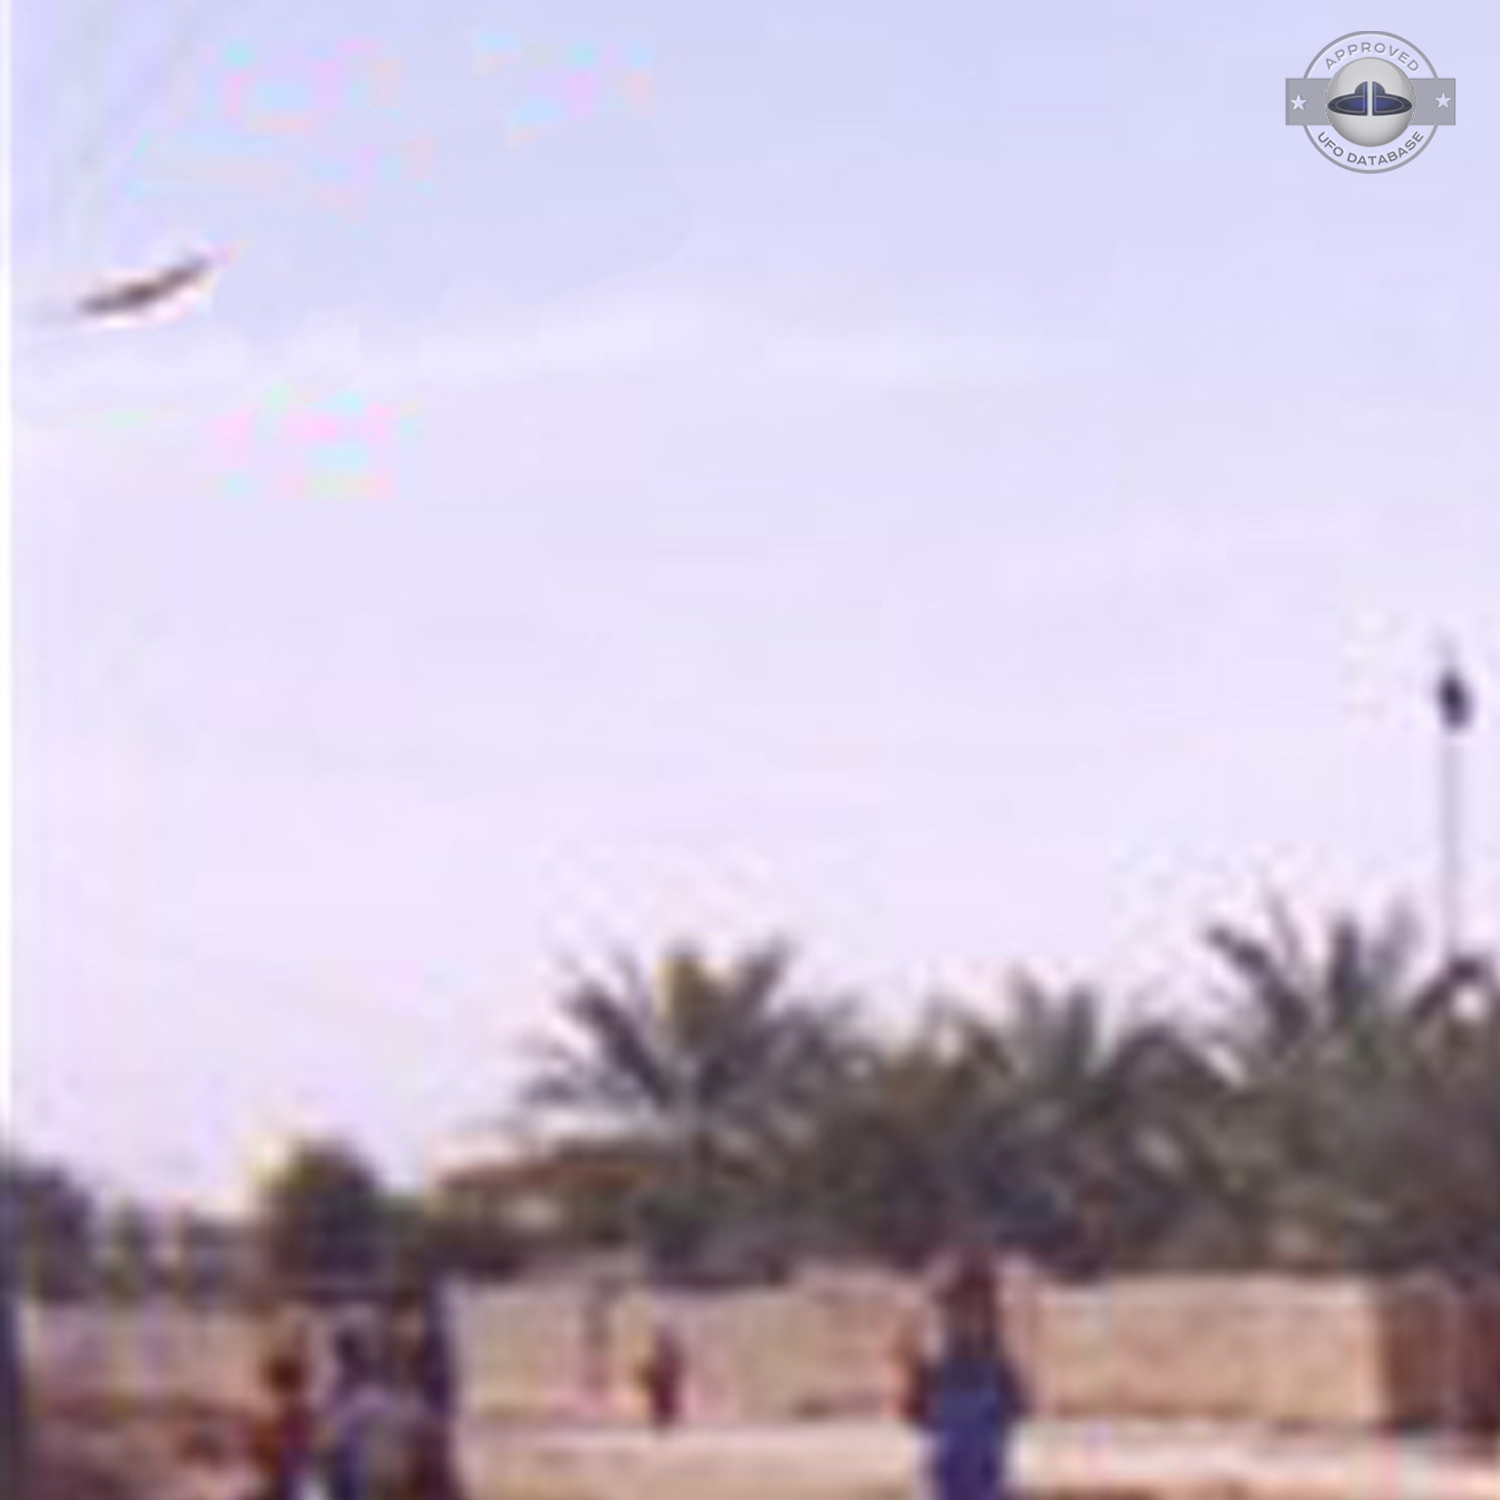 UFO seen passing over Kids in Baghdad, Iraq | April 03 2004 UFO Picture #199-3